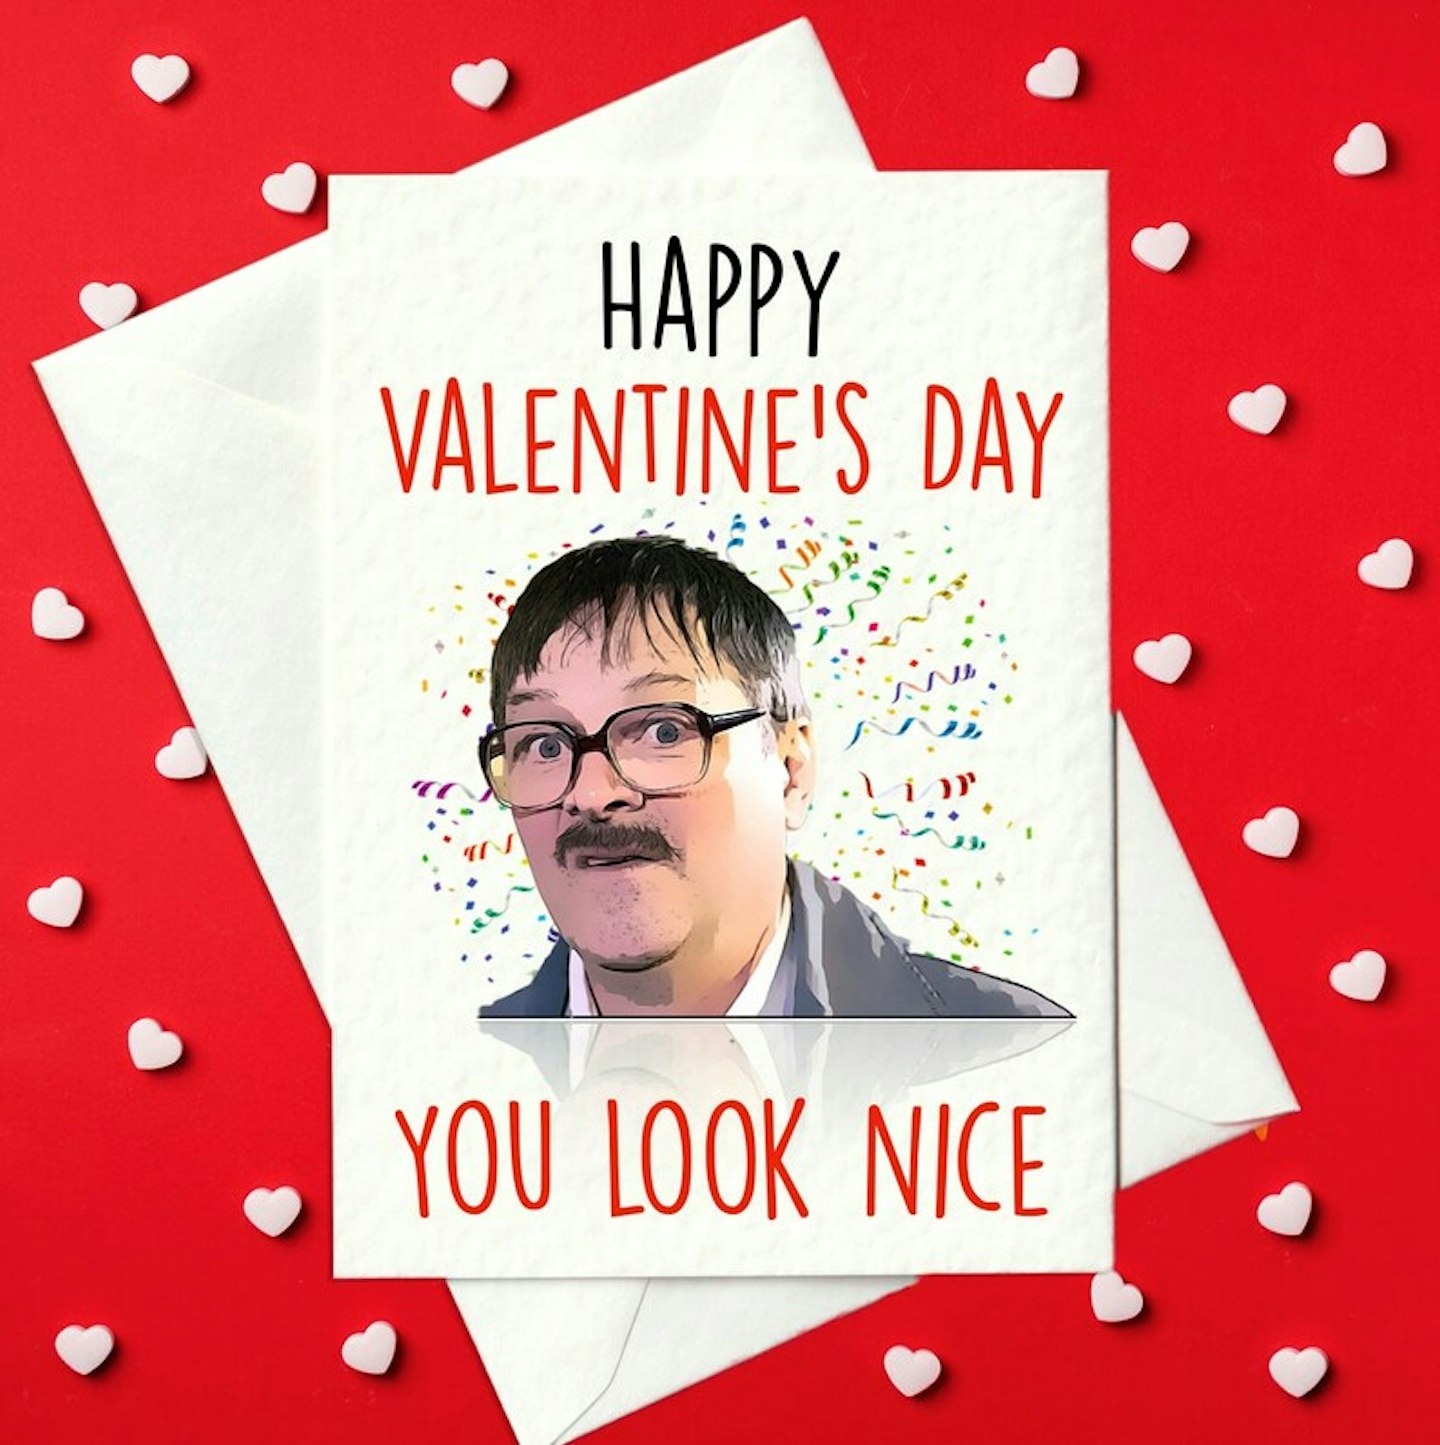 Happy Valentine's Day - You Look Nice - Jim, Friday Night Dinner Valentine's Card (A6)